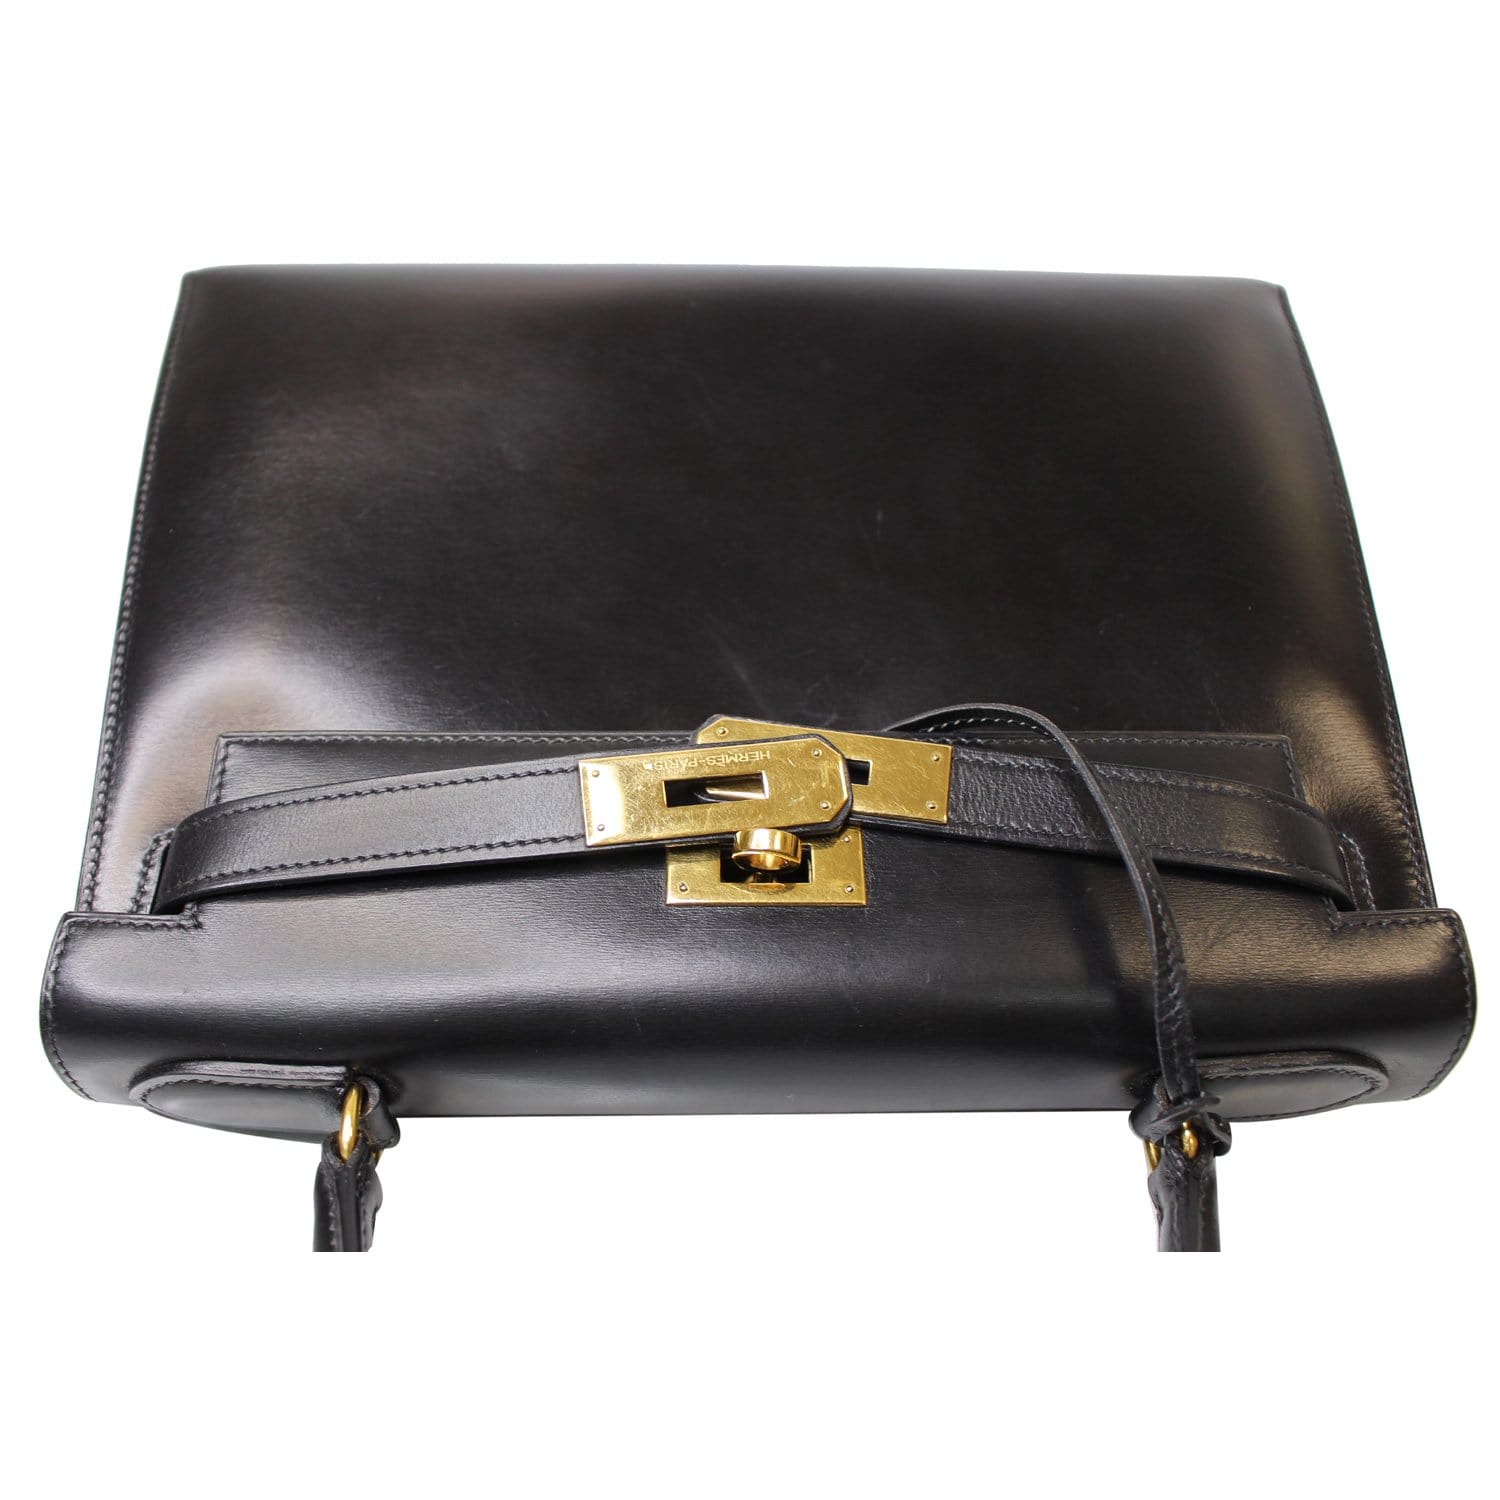 Hermes Kelly 28 box leather